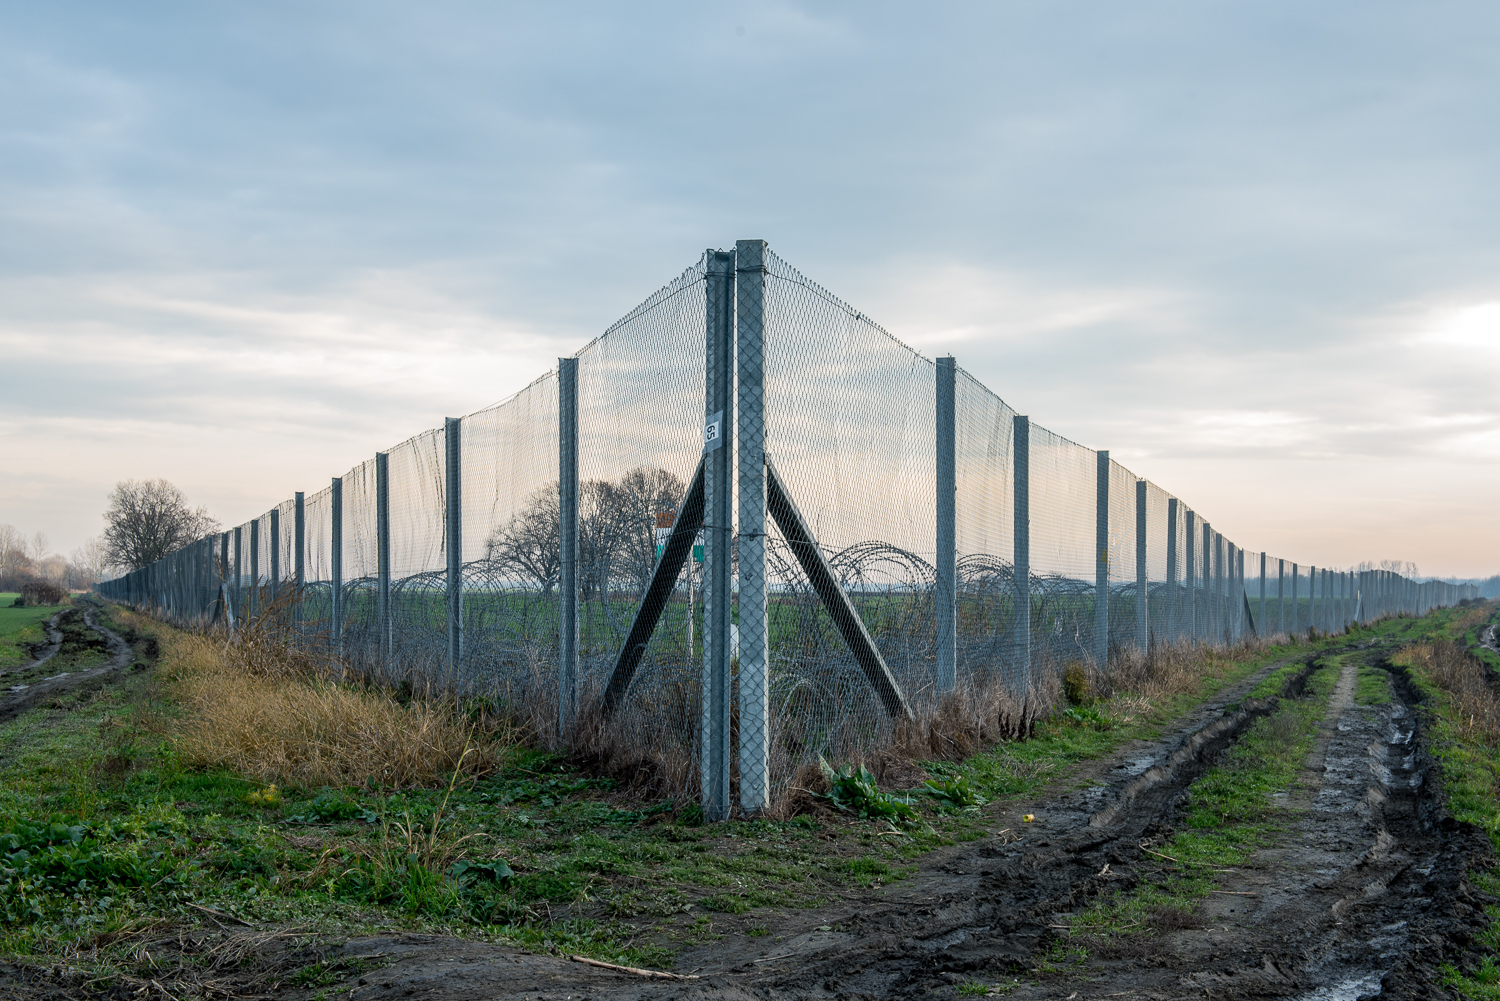  The border barrier which separates Hungary and Croatia near Kásád, Hungary 25 November 2017. The fence was constructed in the middle of the European migration crisis in 2015, with the aim to ensure border security by preventing immigrants from enter